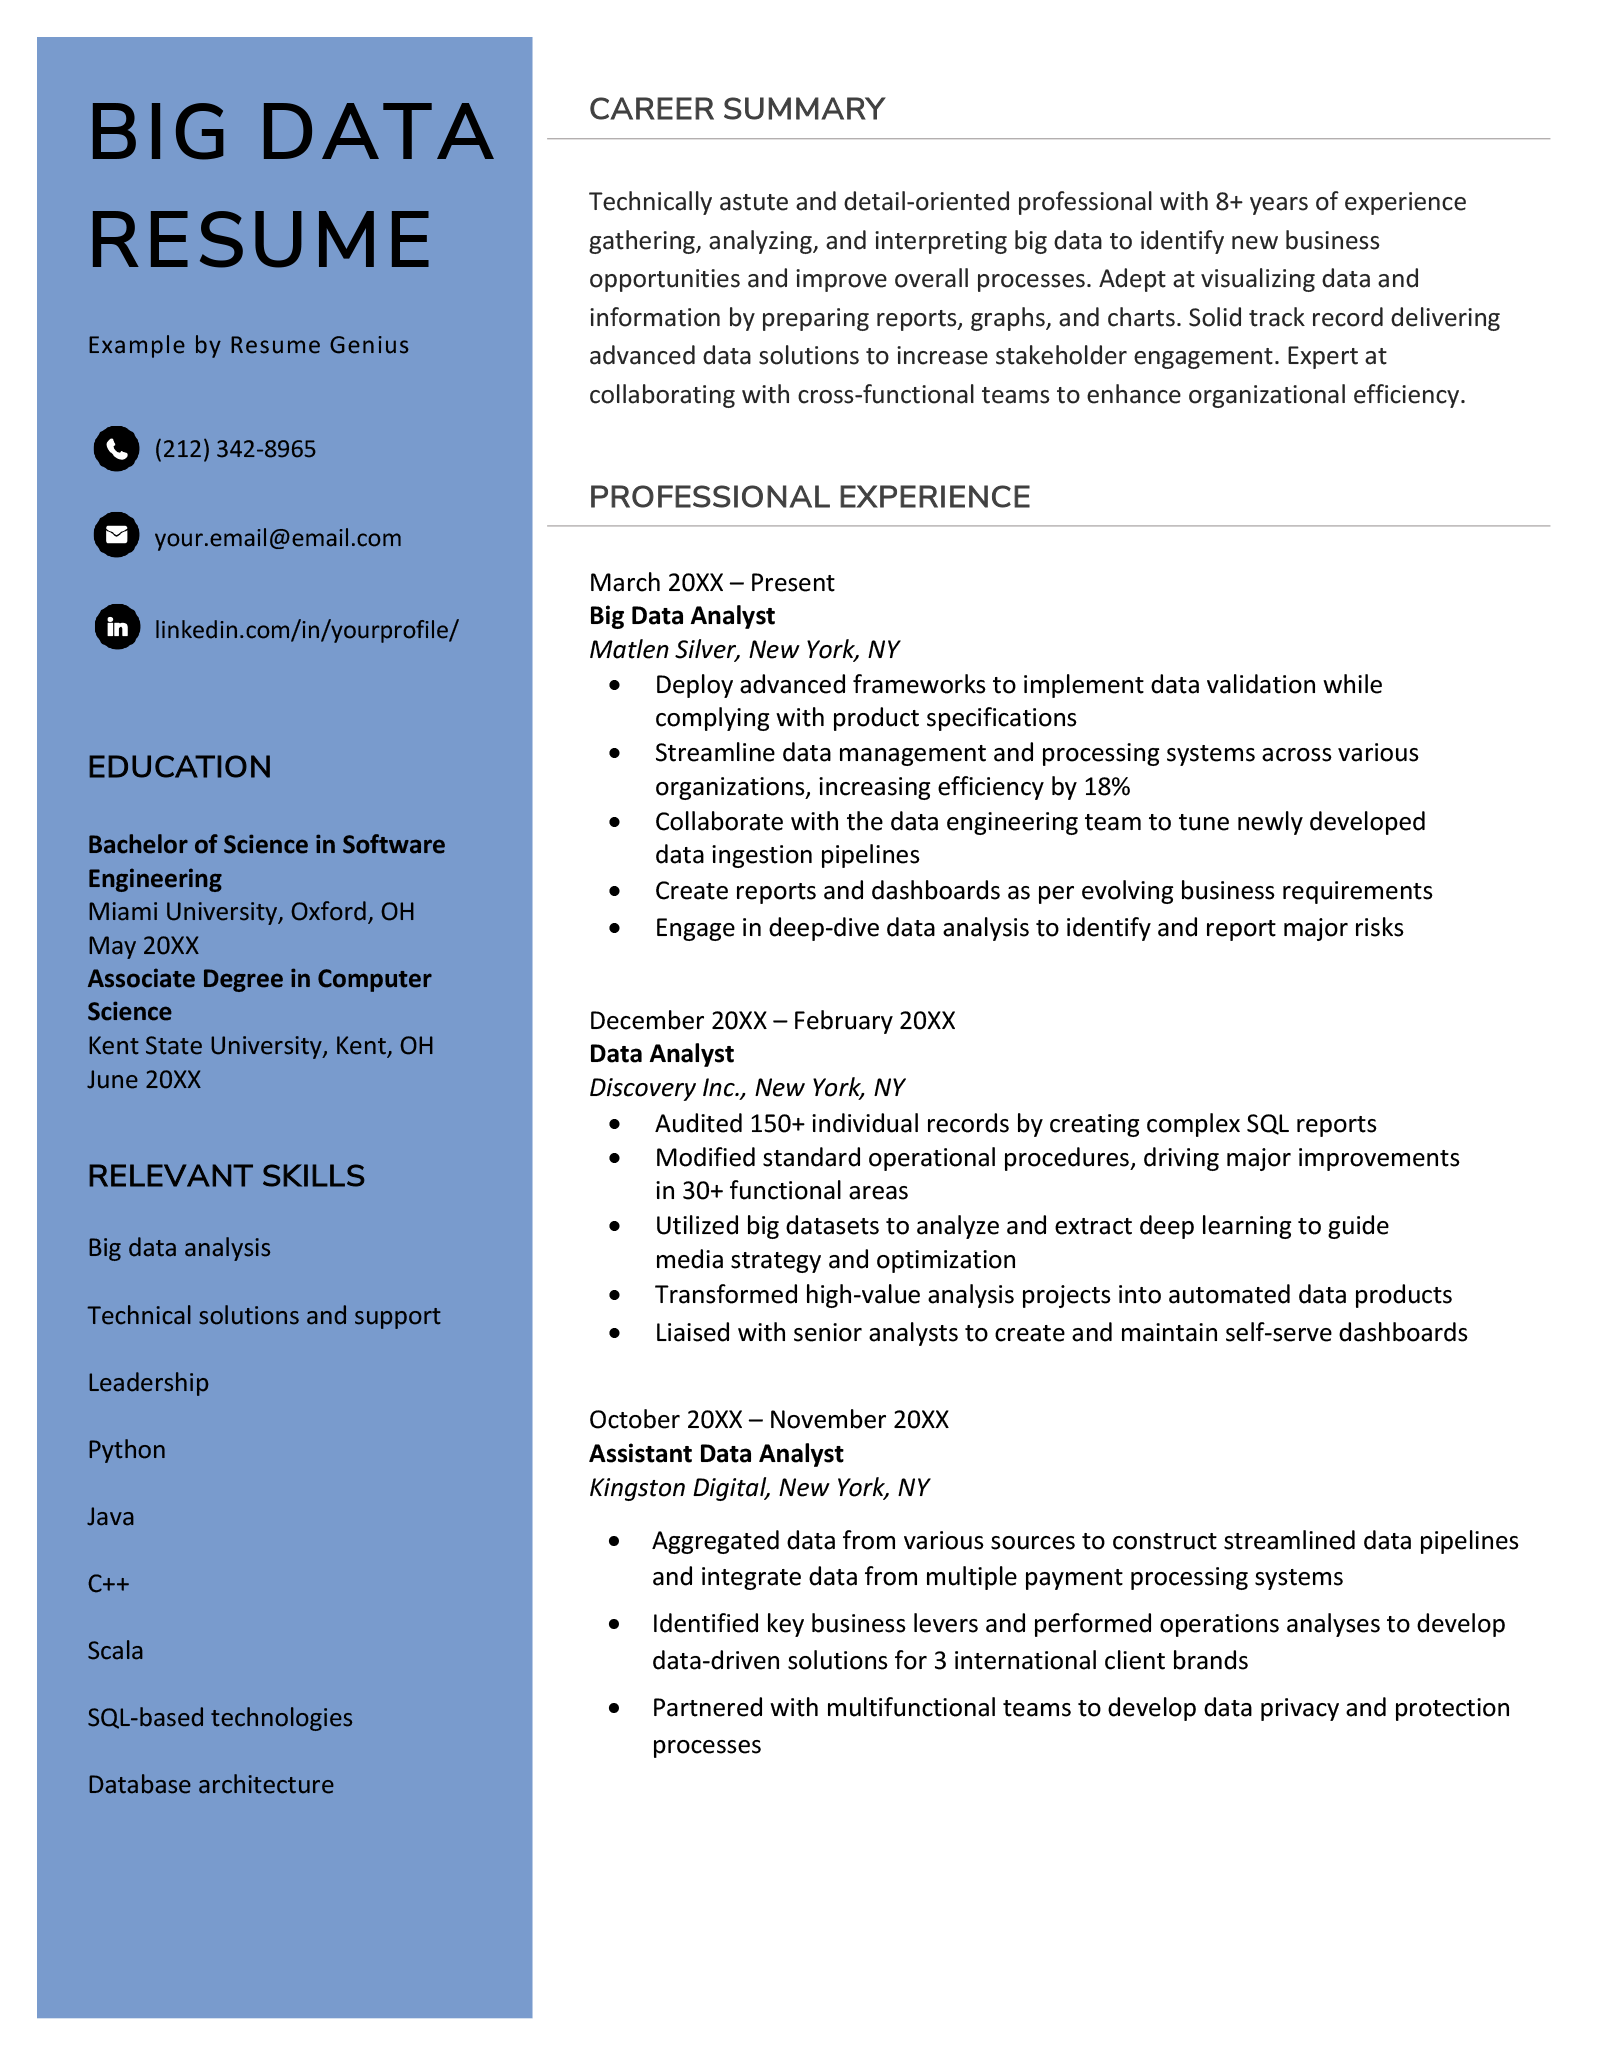 A big data resume sample with a blue left-hand margin to highlight the applicant's professional title, contact information, education and key skills